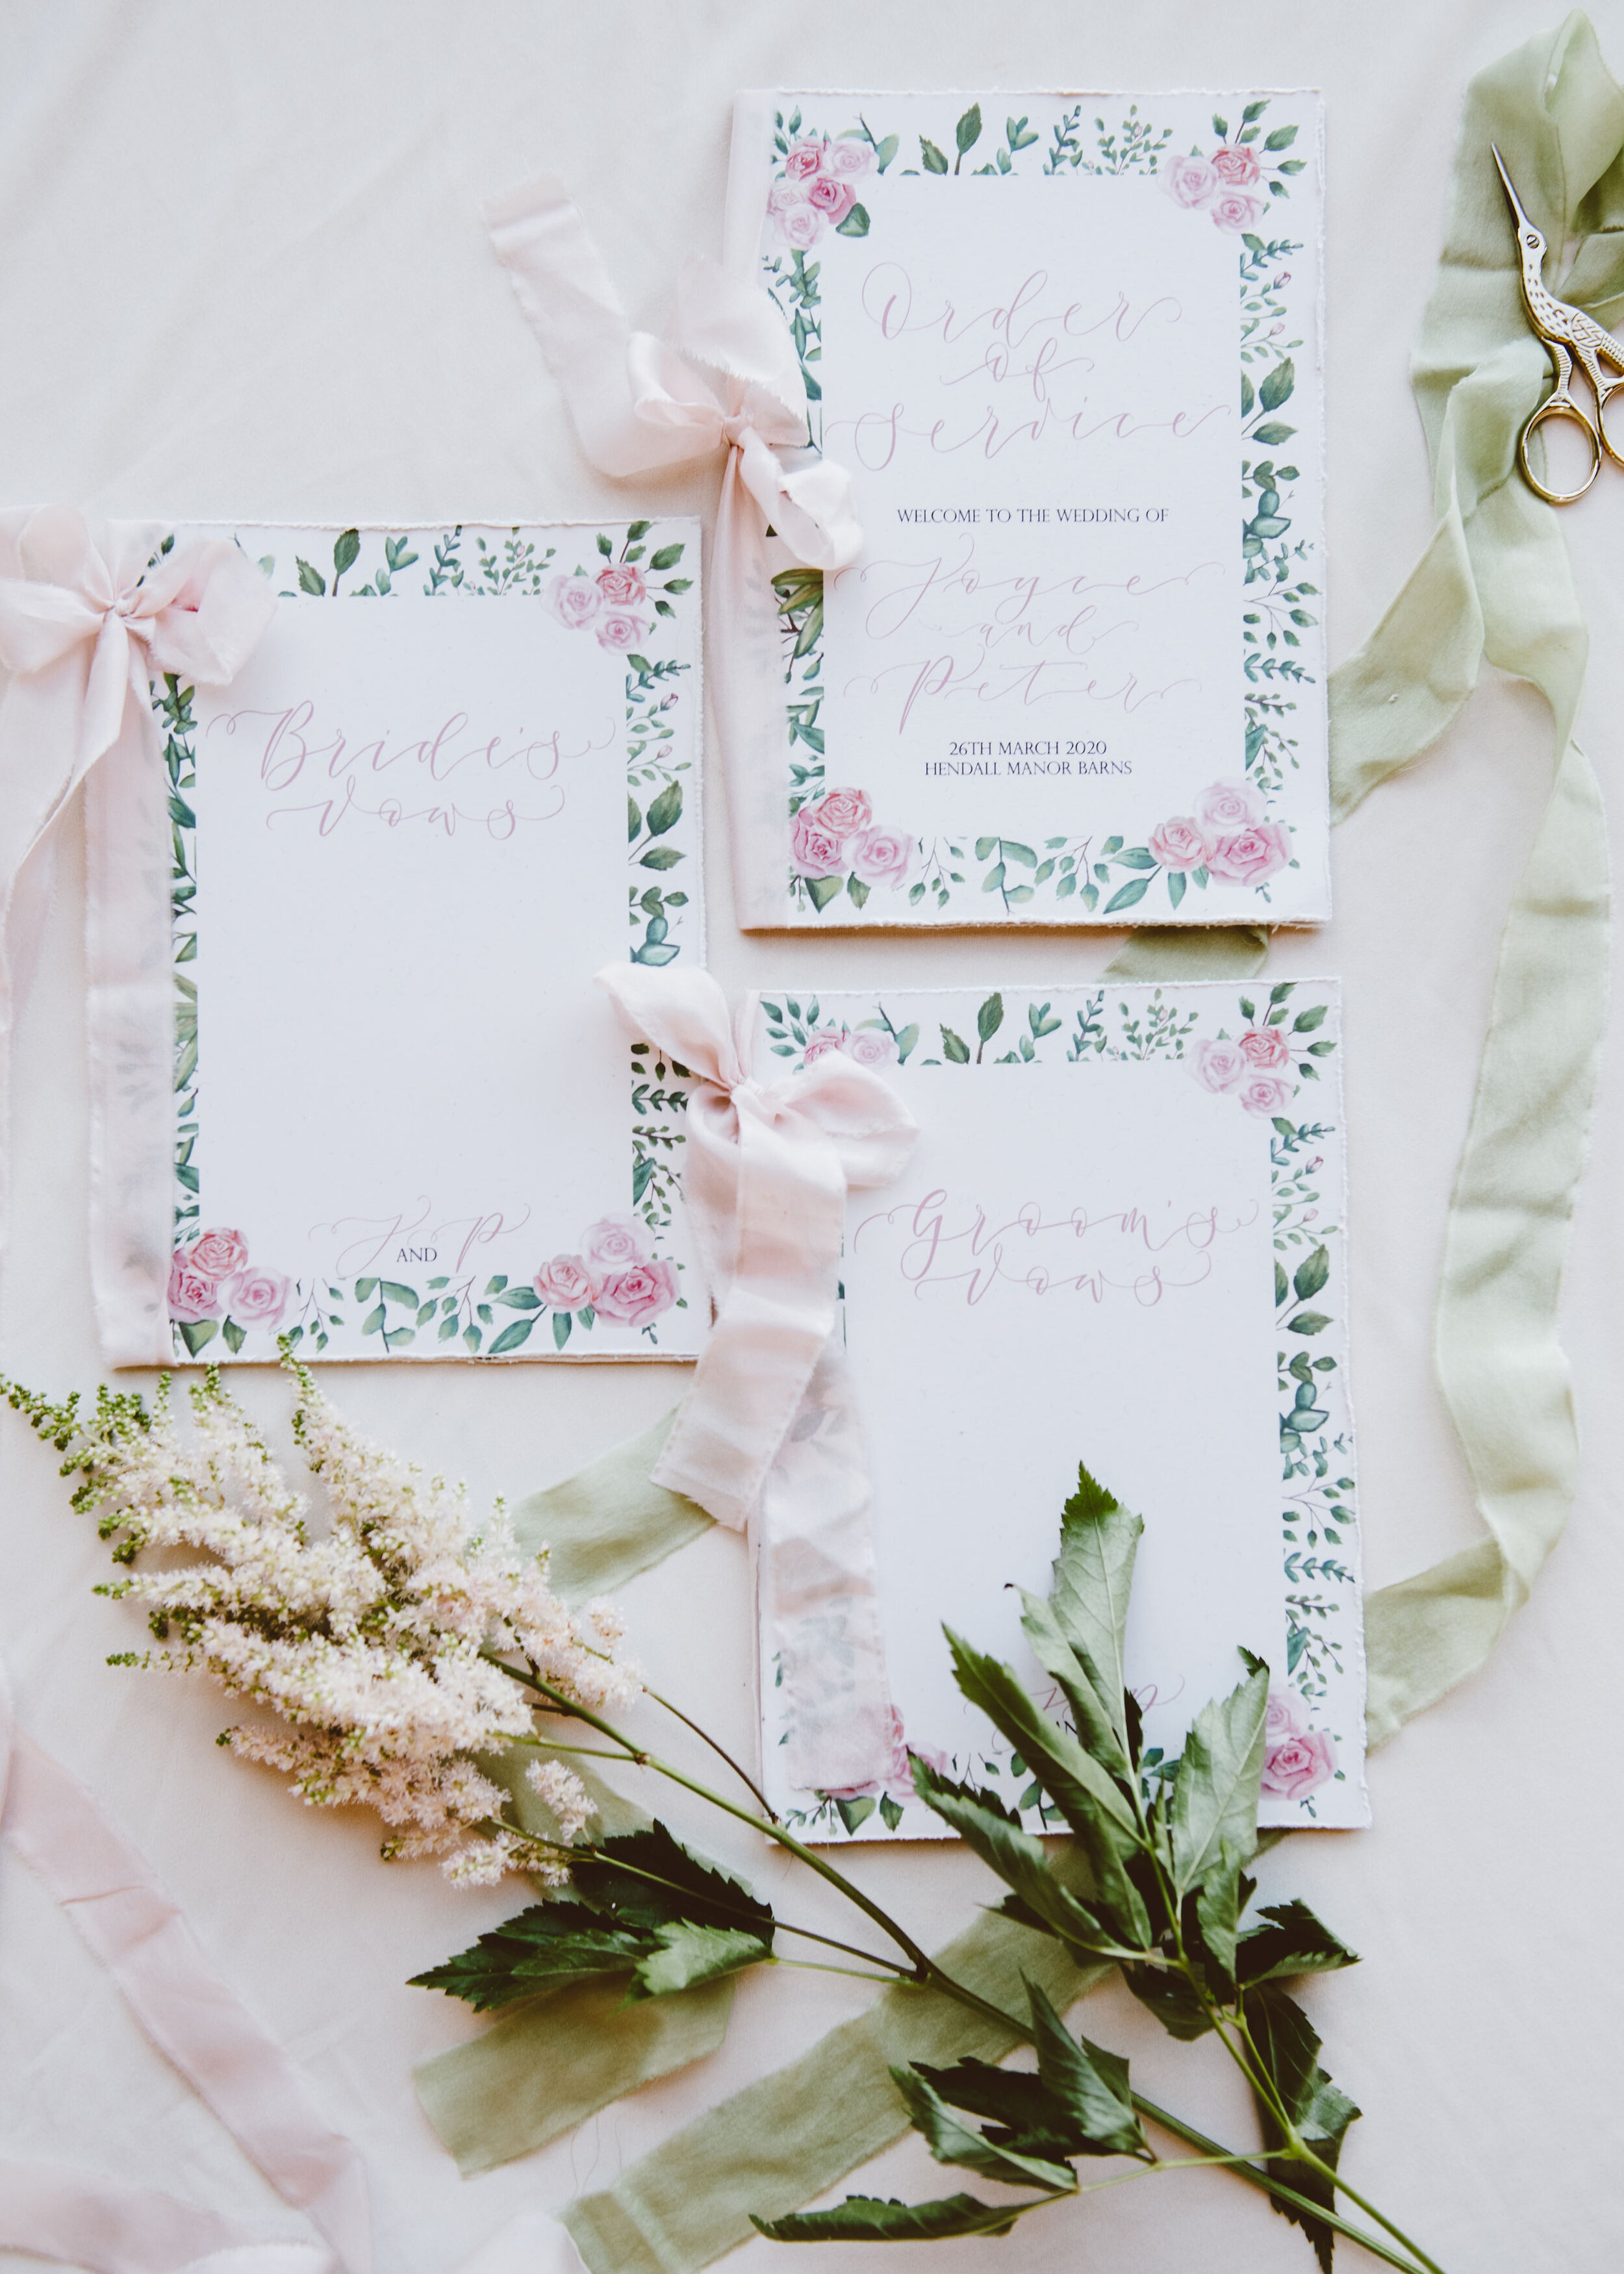 Luxury recycled paper floral vow books and order of service  with pink roses and greenery and hand-lettered calligraphy by The Amyverse - Eco friendly wedding stationery